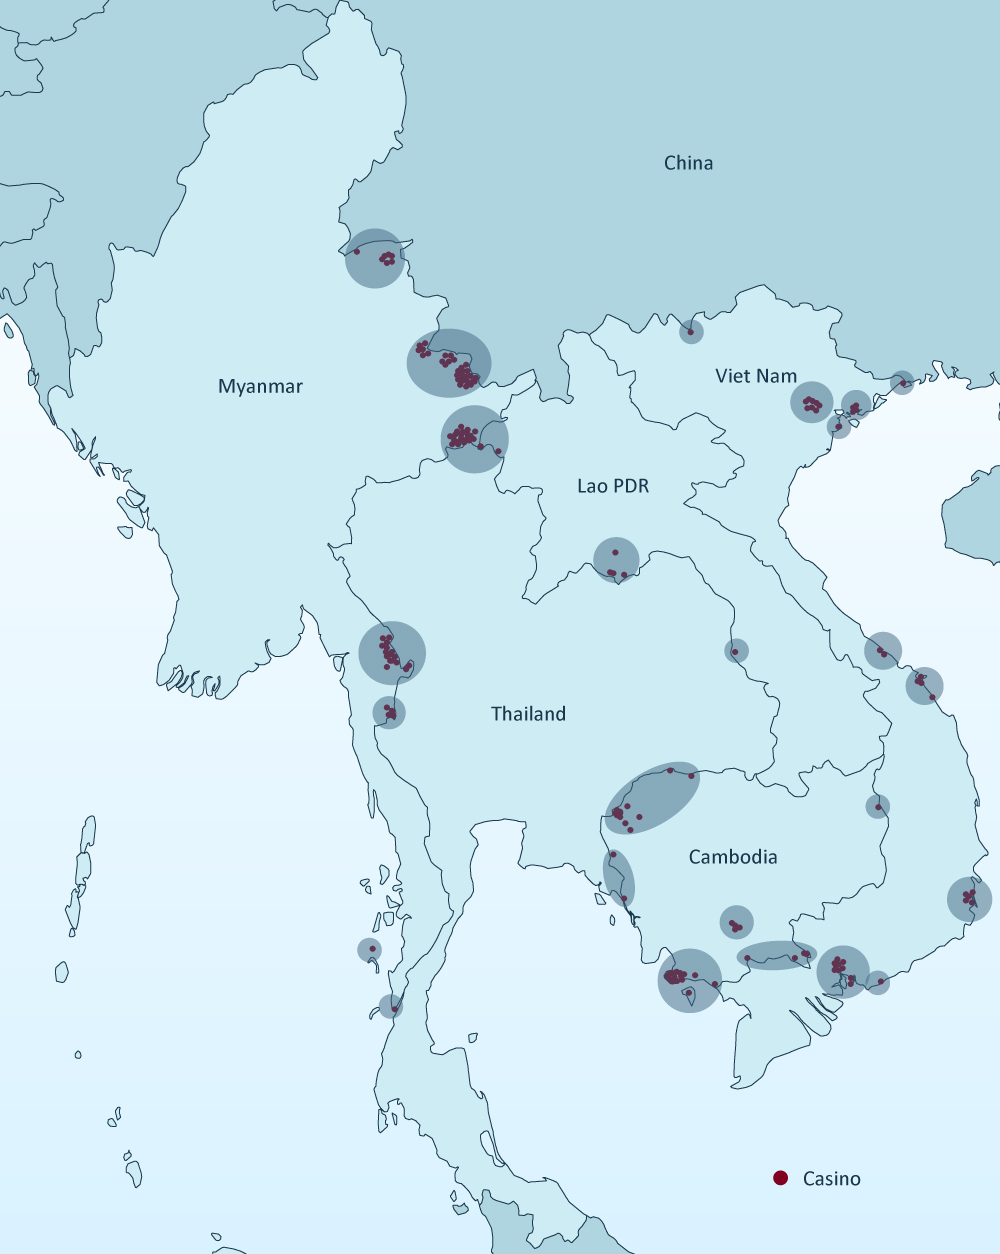 Locations of casinos in lower Mekong countries in 2022. <br /> Source: UNODC elaboration based on information obtained through various channels, including its Country Offices in Southeast Asia and field researchers.